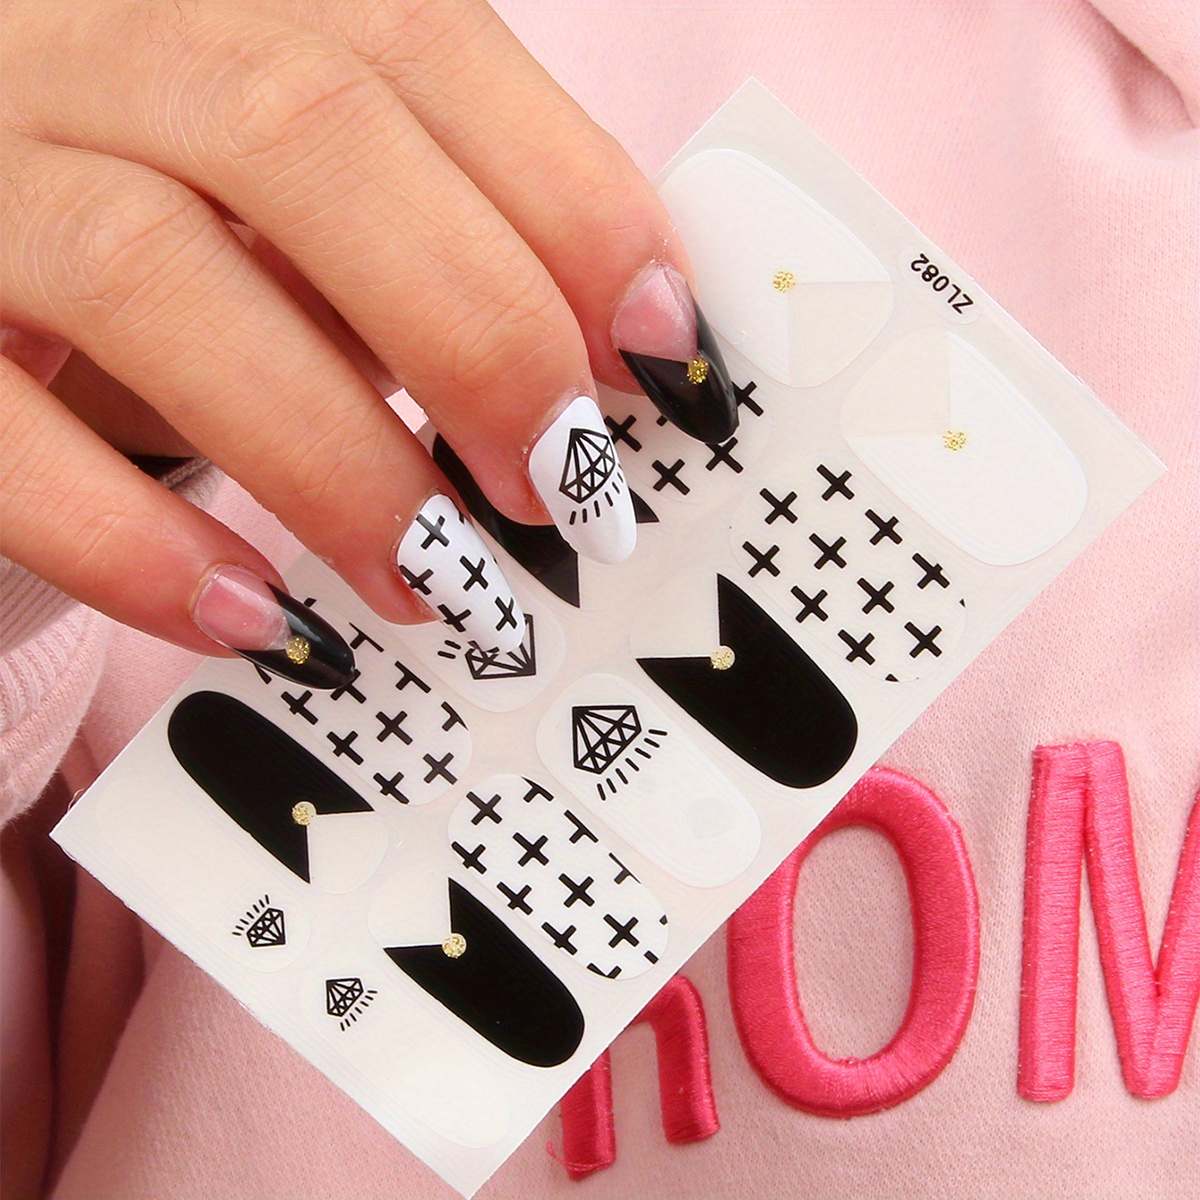 Nail Art Sticker Nails Art Decoration Manicure Shiny Nail Decals With Design  Nail Accessories Women Girls, Free Shipping, Free Returns